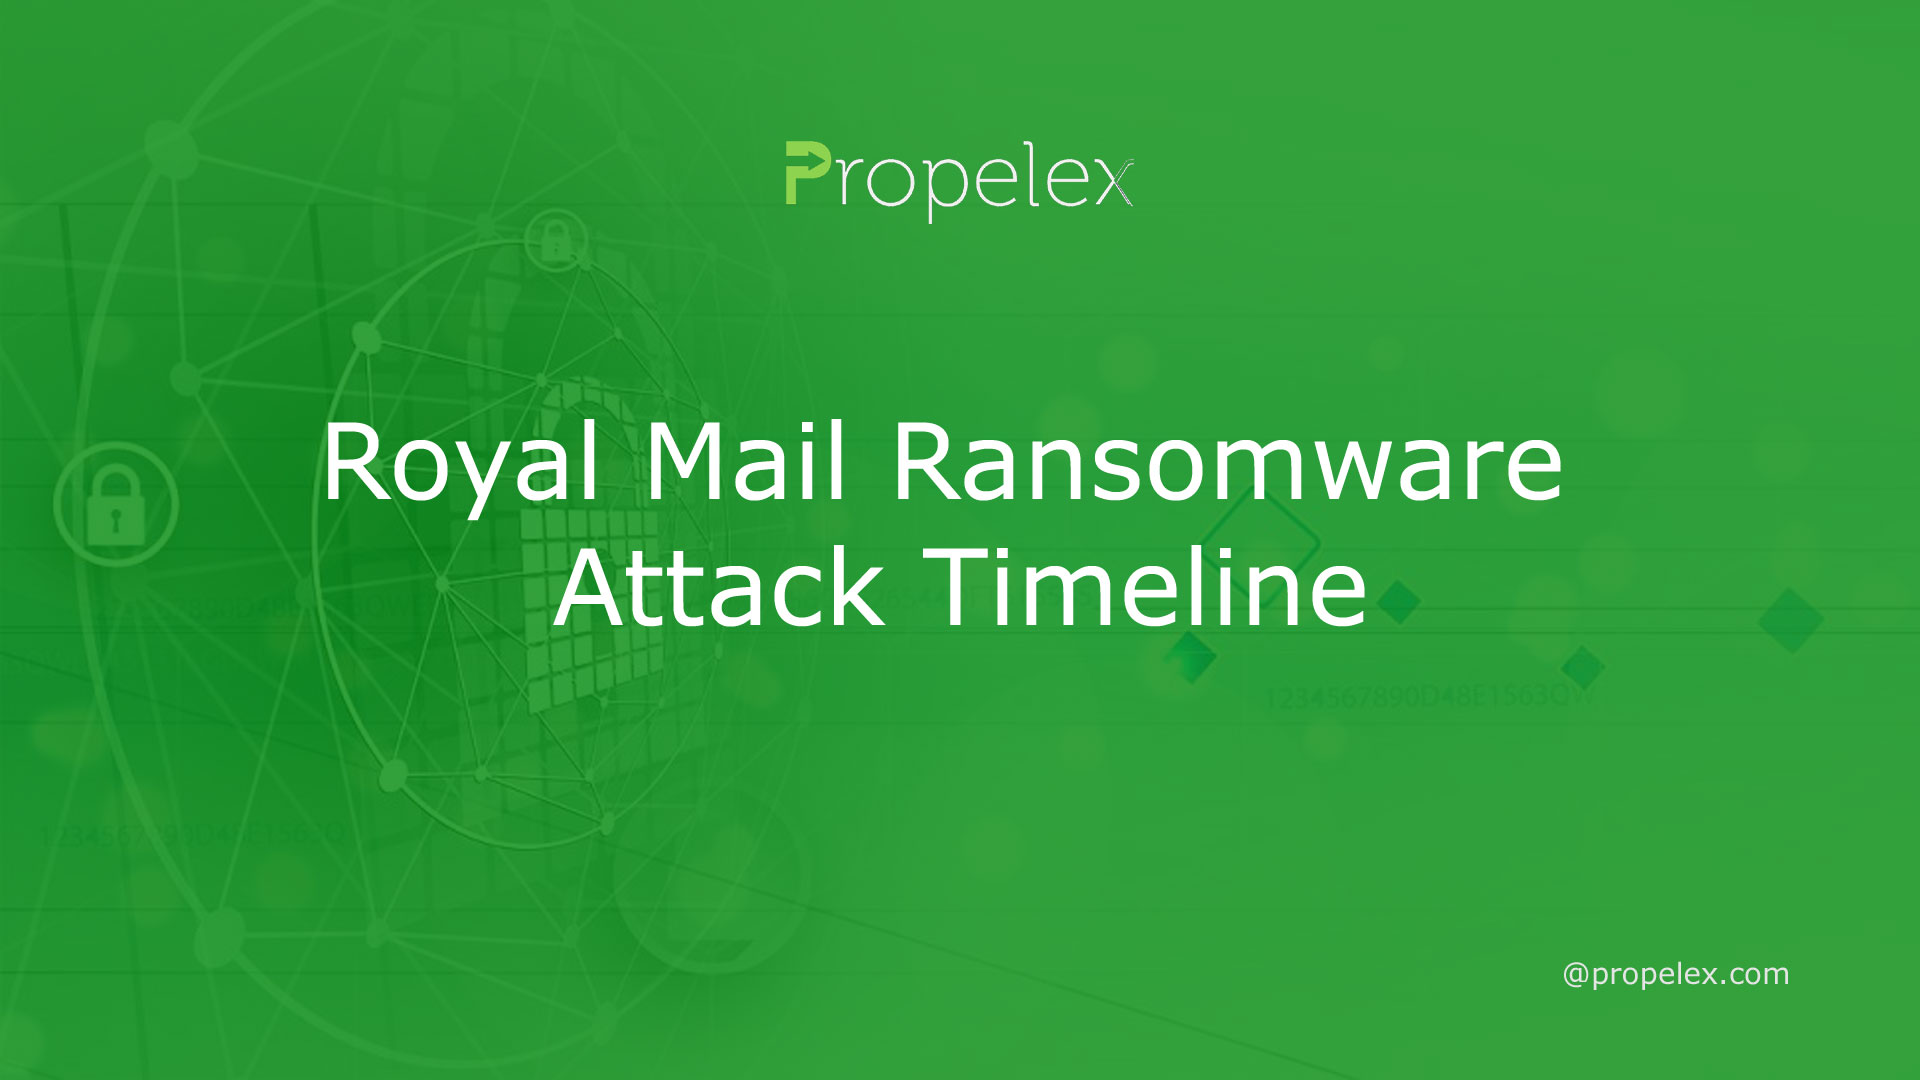 Royal Mail Ransomware Attack Timeline